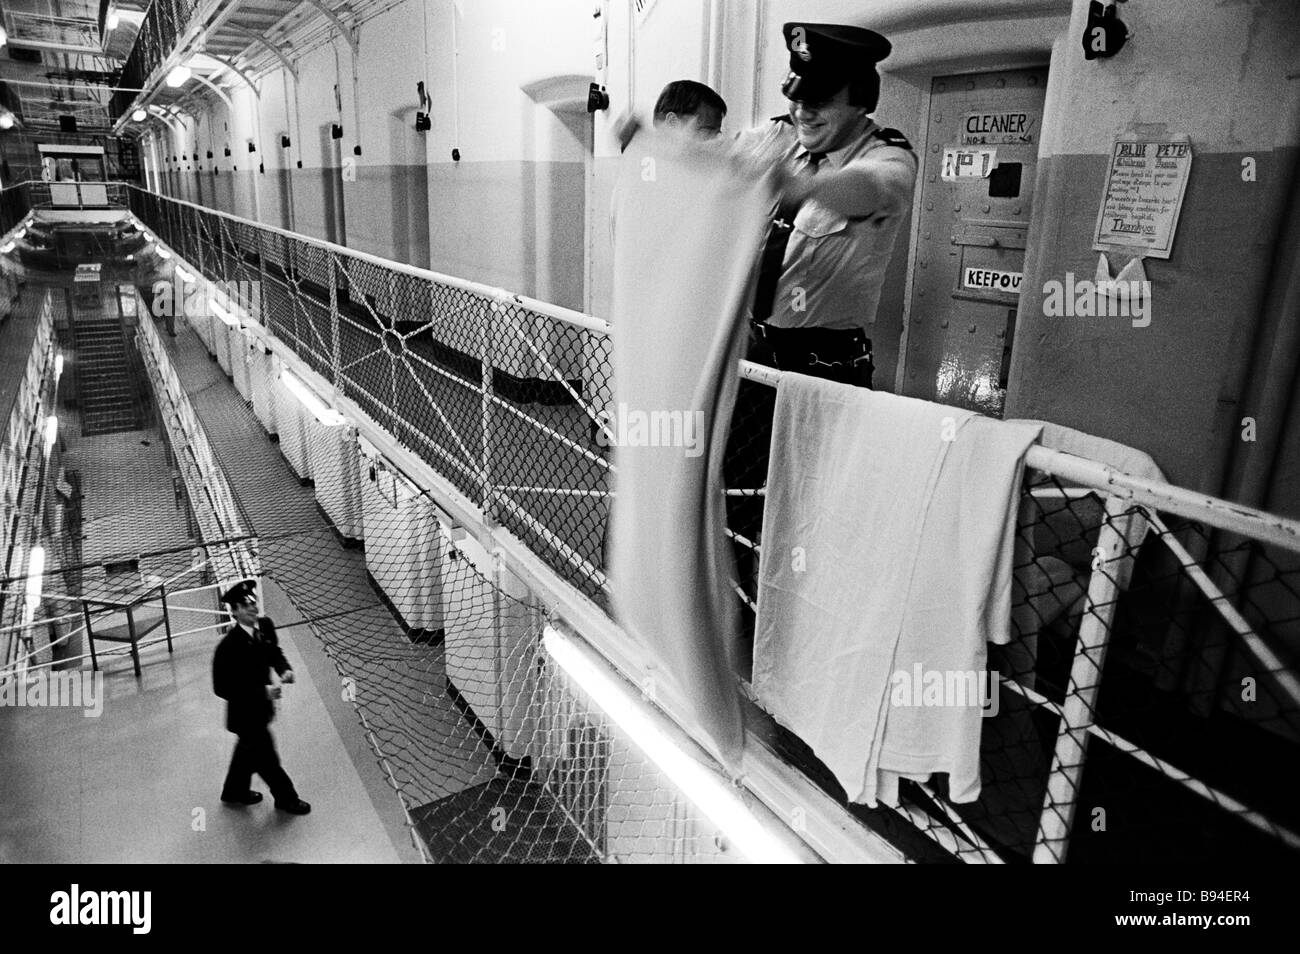 Prison officer shakes out bedding during a search of one of the cells. Pentonville Prison, London, England Stock Photo